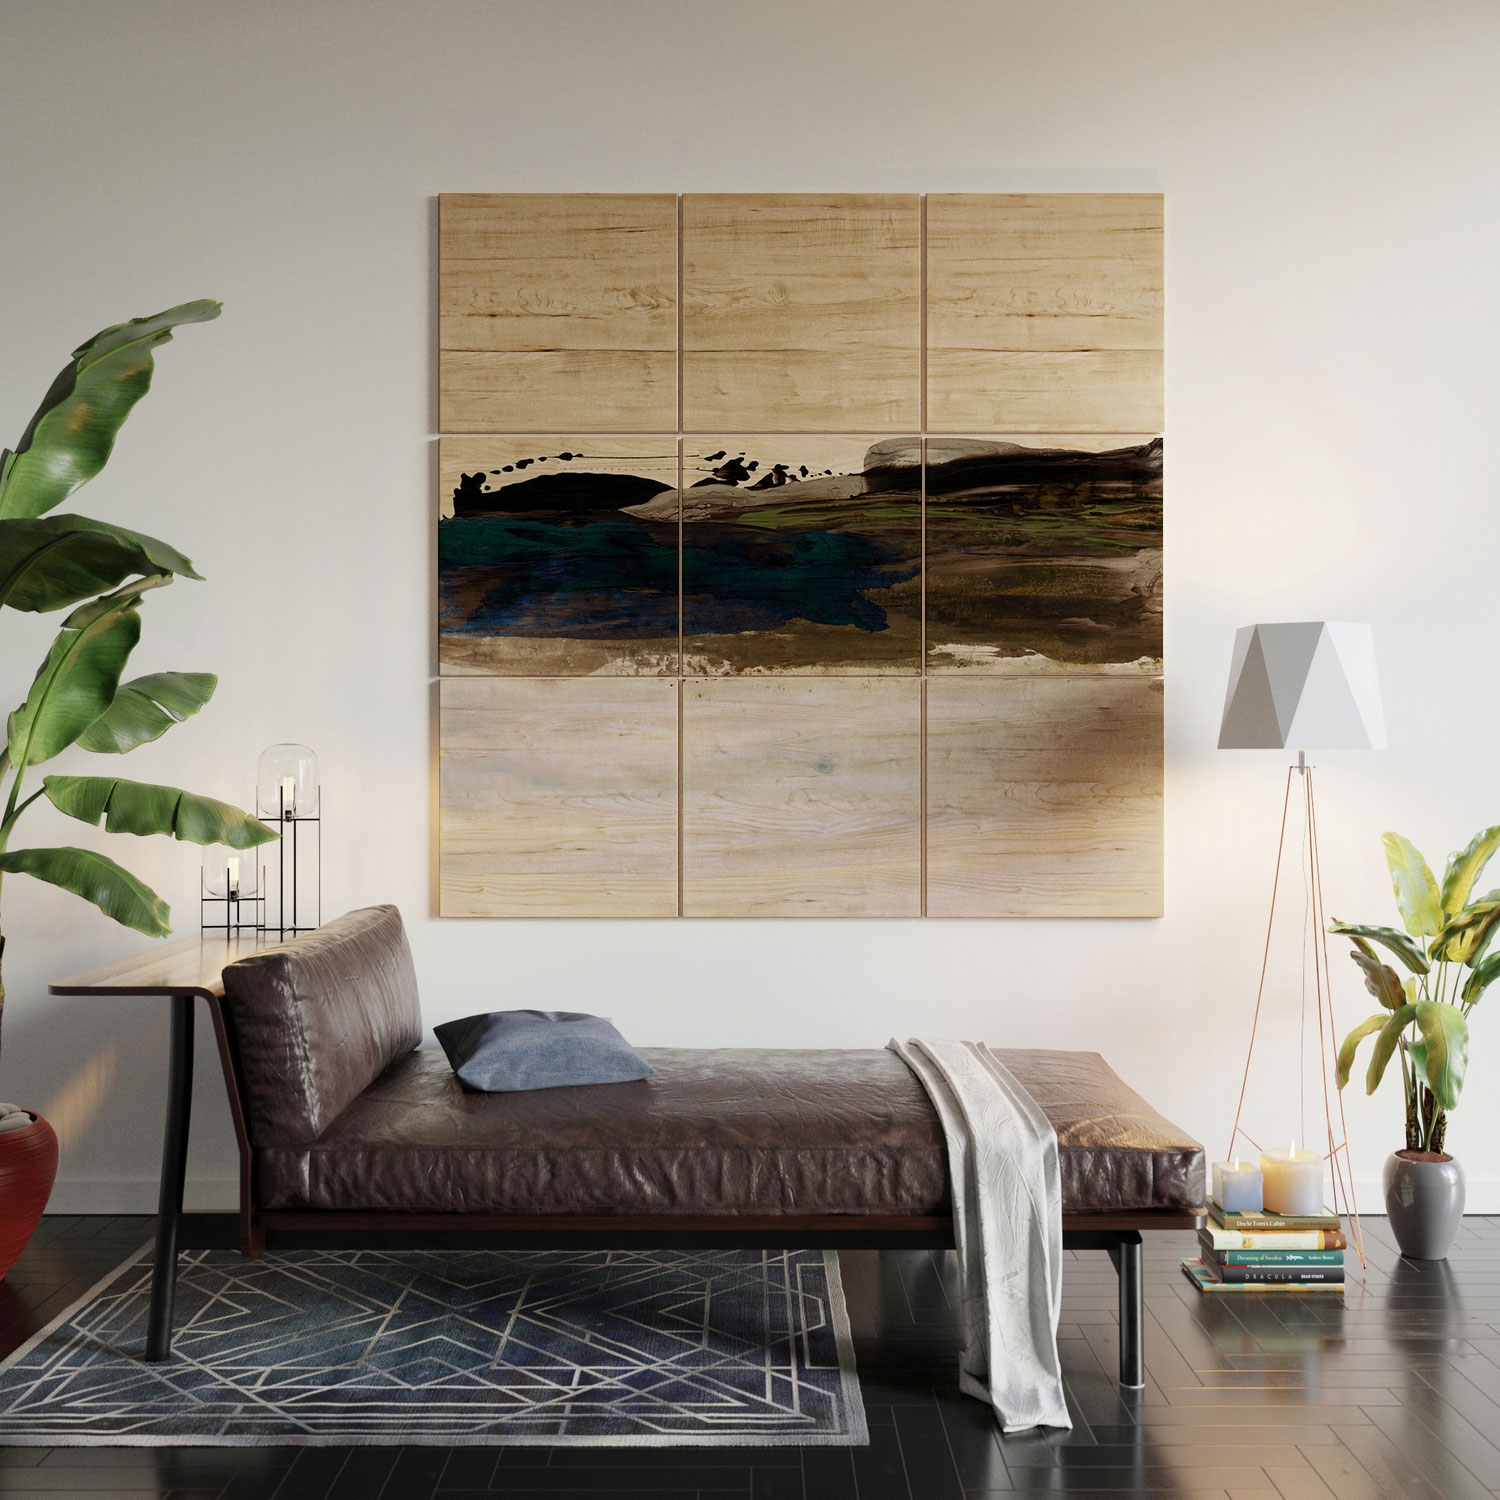 Soulscape 02 by Iris Lehnhardt - Wood Wall Mural5' x 5' (Nine 20" wood Squares) - Image 2